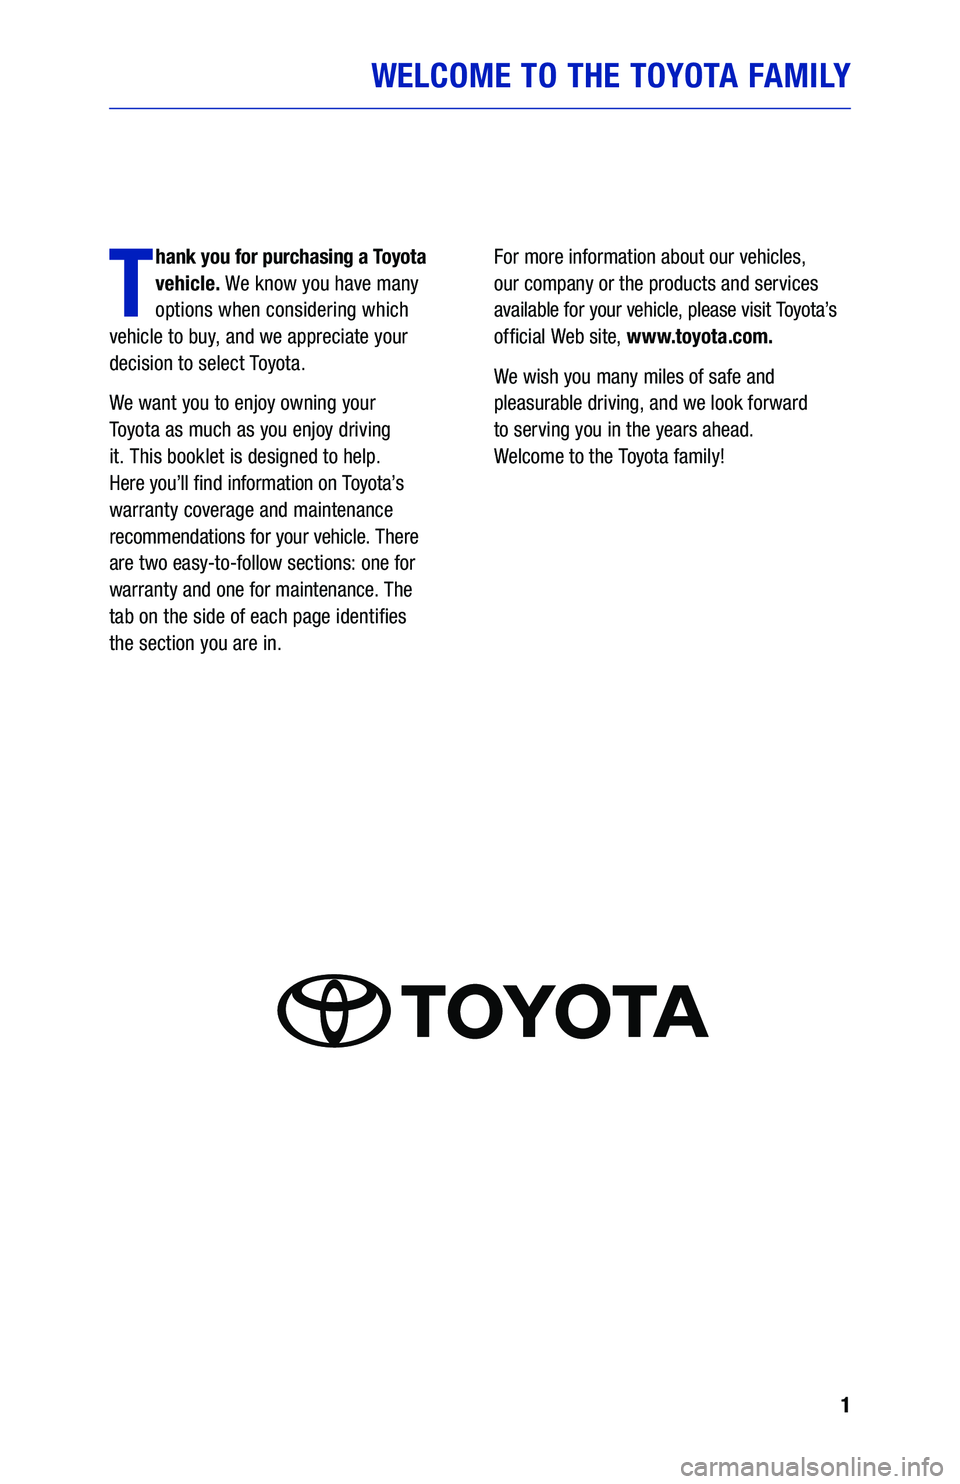 TOYOTA 4RUNNER 2019  Warranties & Maintenance Guides (in English) 1
WELCOME TO THE TOYOTA FAMILY
T
hank you for purchasing a Toyota  
vehicle. We know you have many 
options when considering which  
vehicle to buy, and we appreciate your 
decision to select Toyota. 